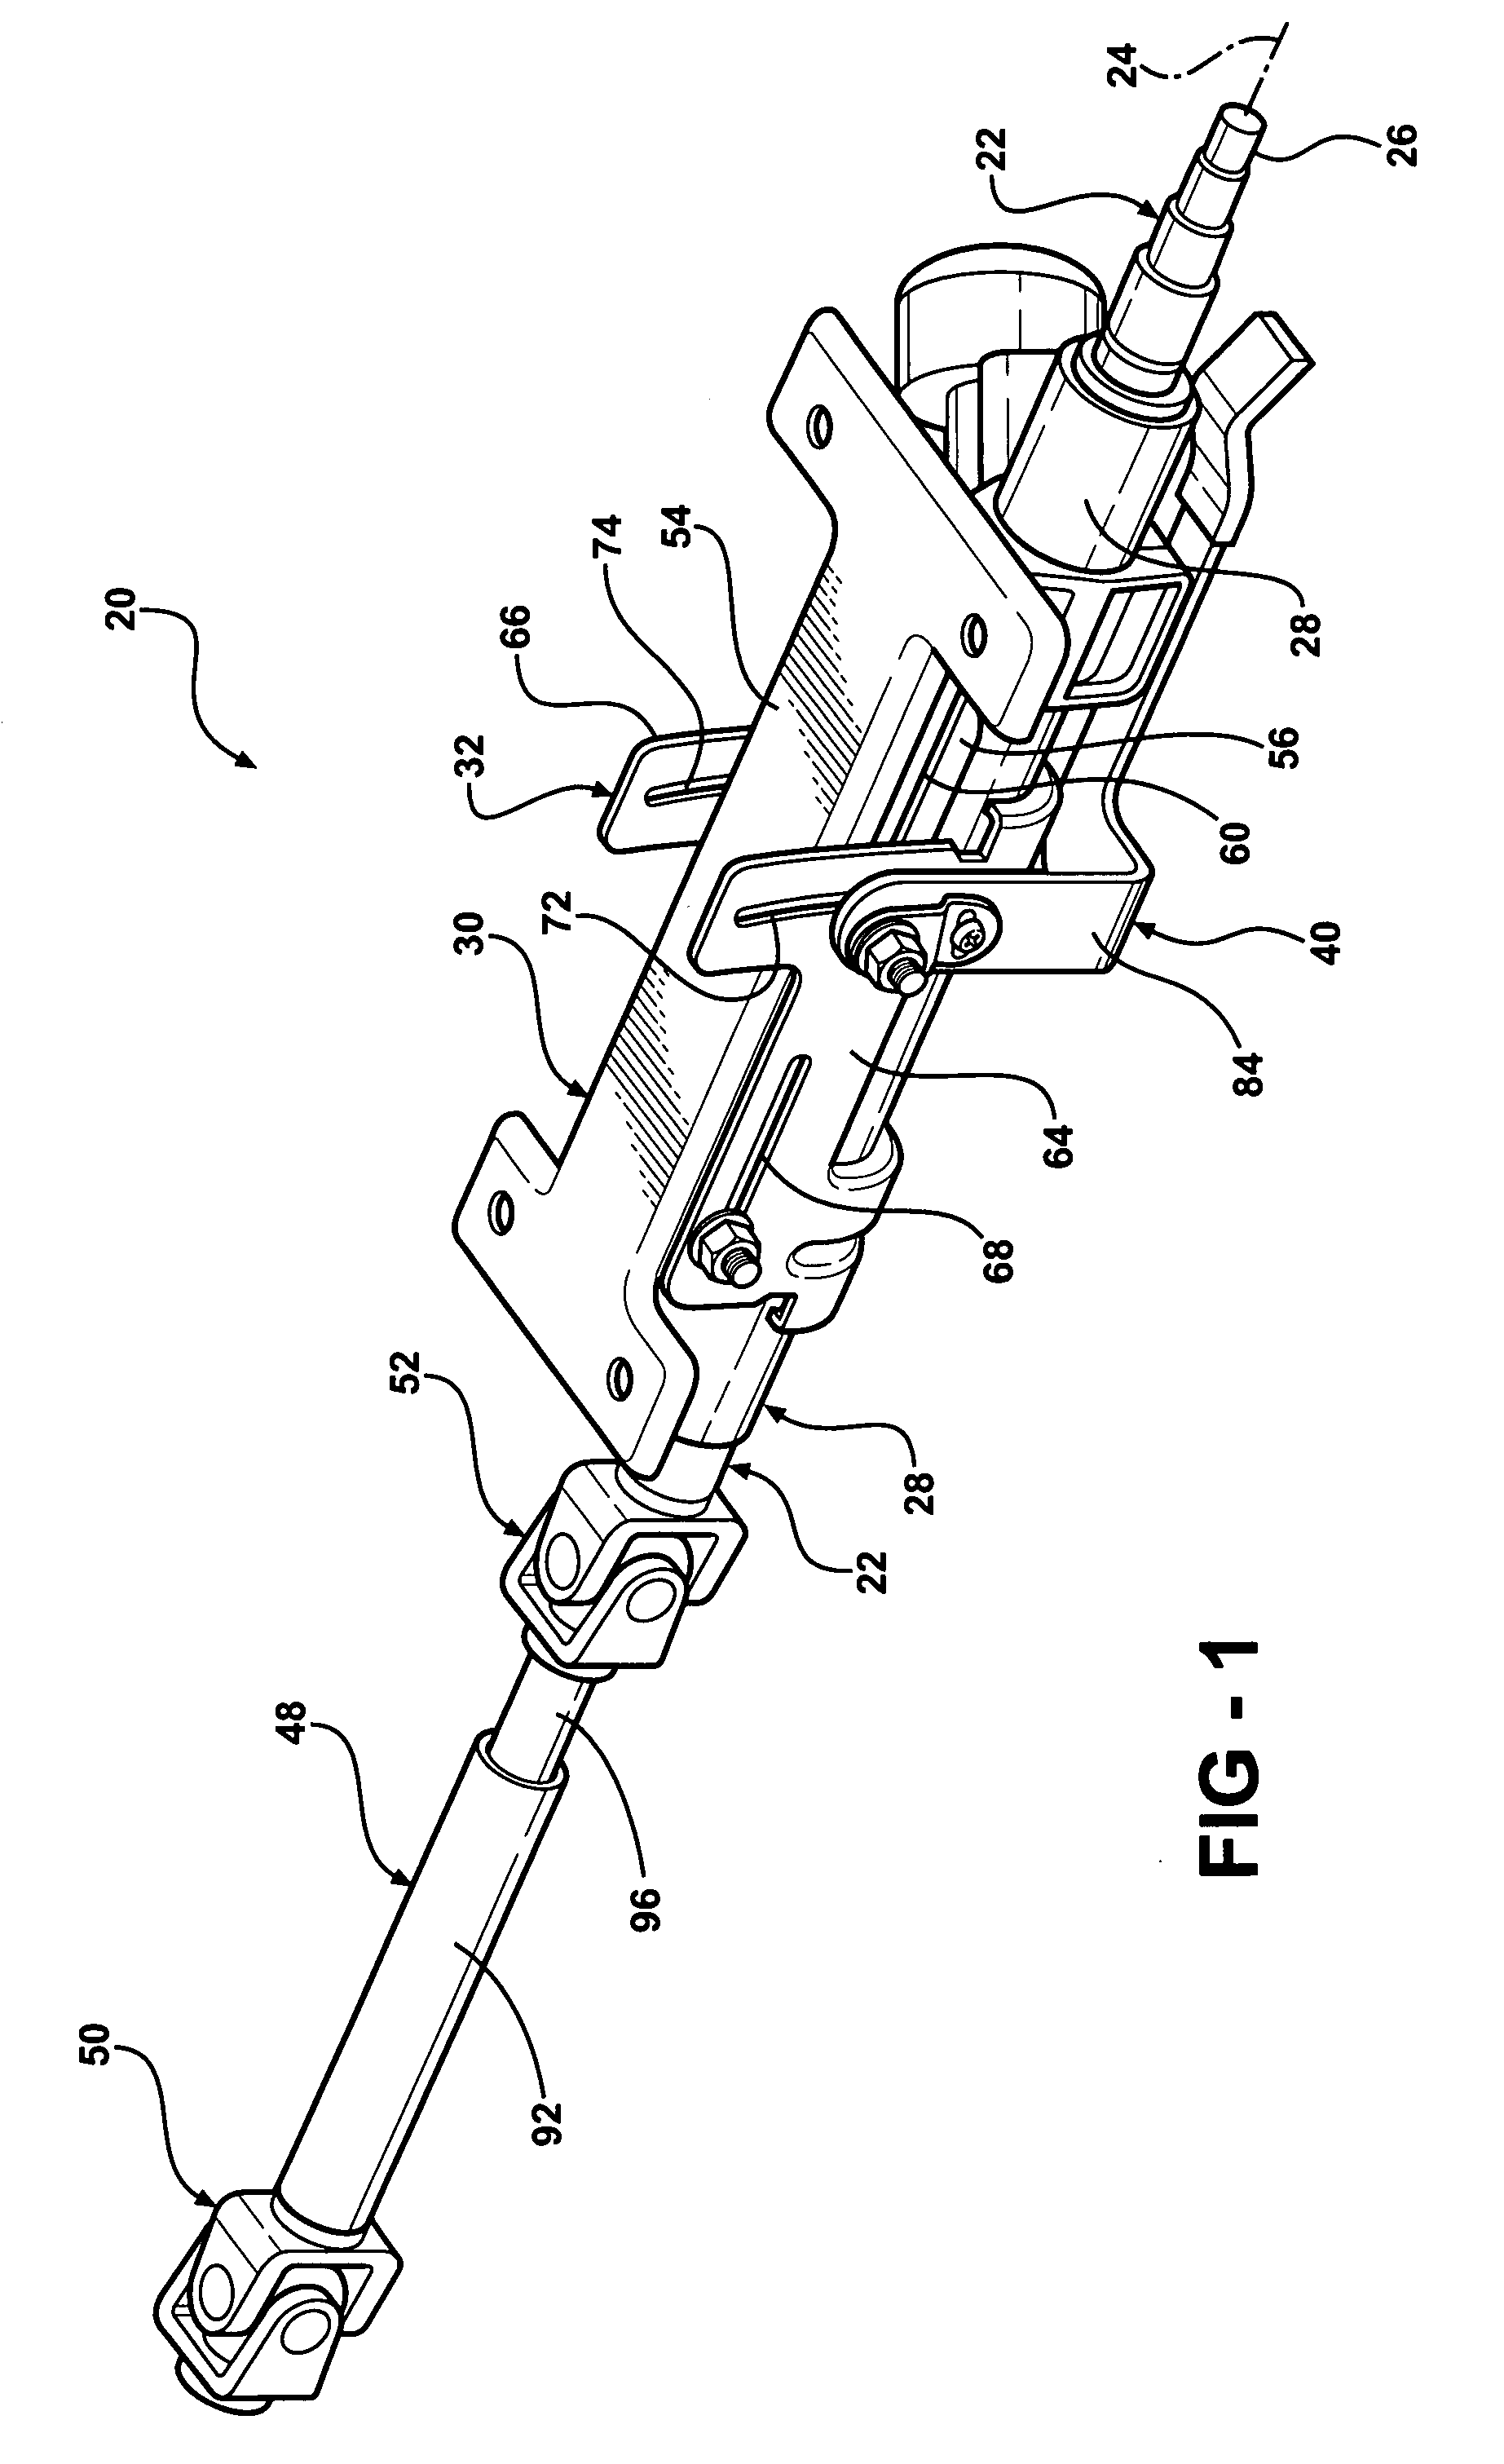 Collapsible steering column assembly